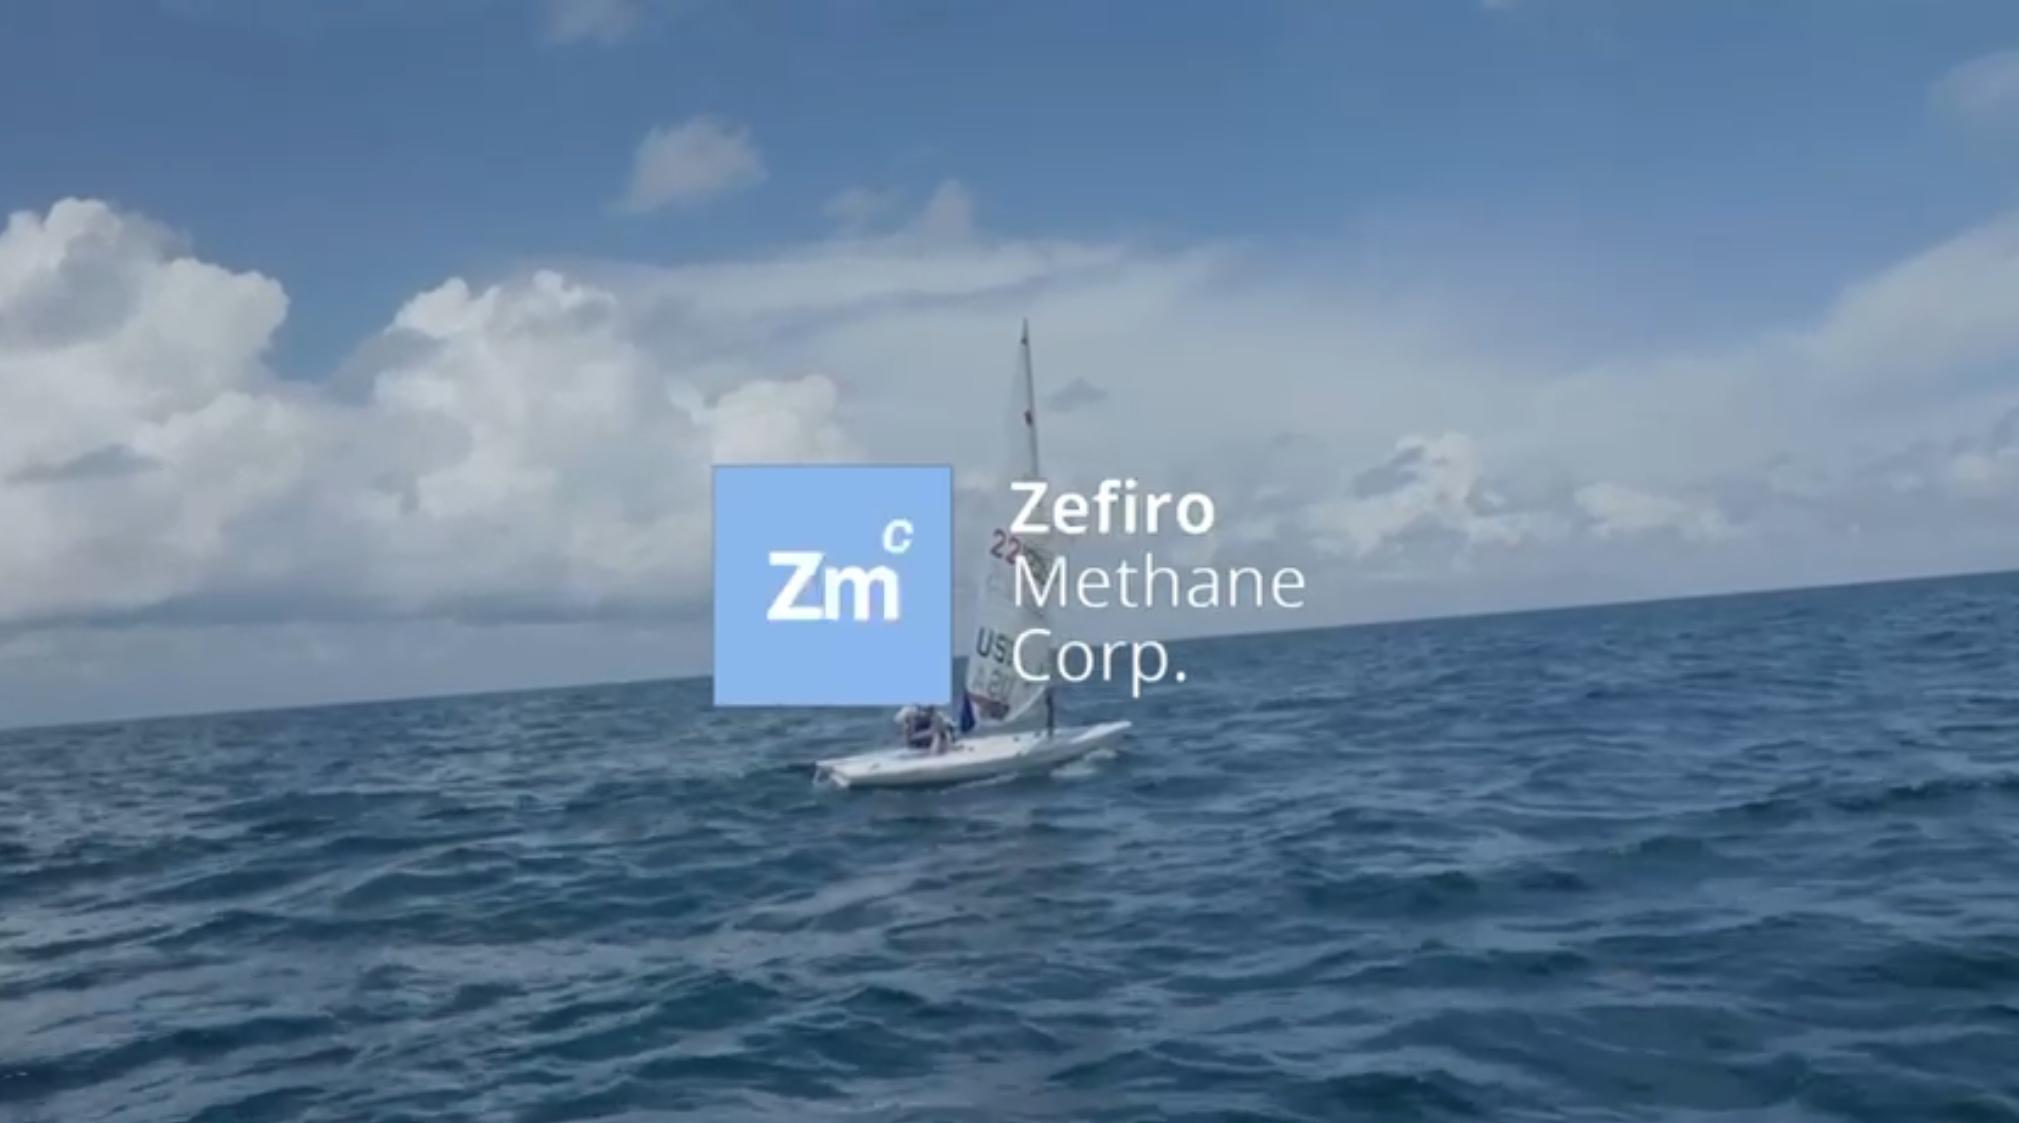 Zefiro-sponsored athlete Erika Reineke is shown in action in the video above, as well as in dialogue with Zefiro Founder and CEO Talal Debs PhD.